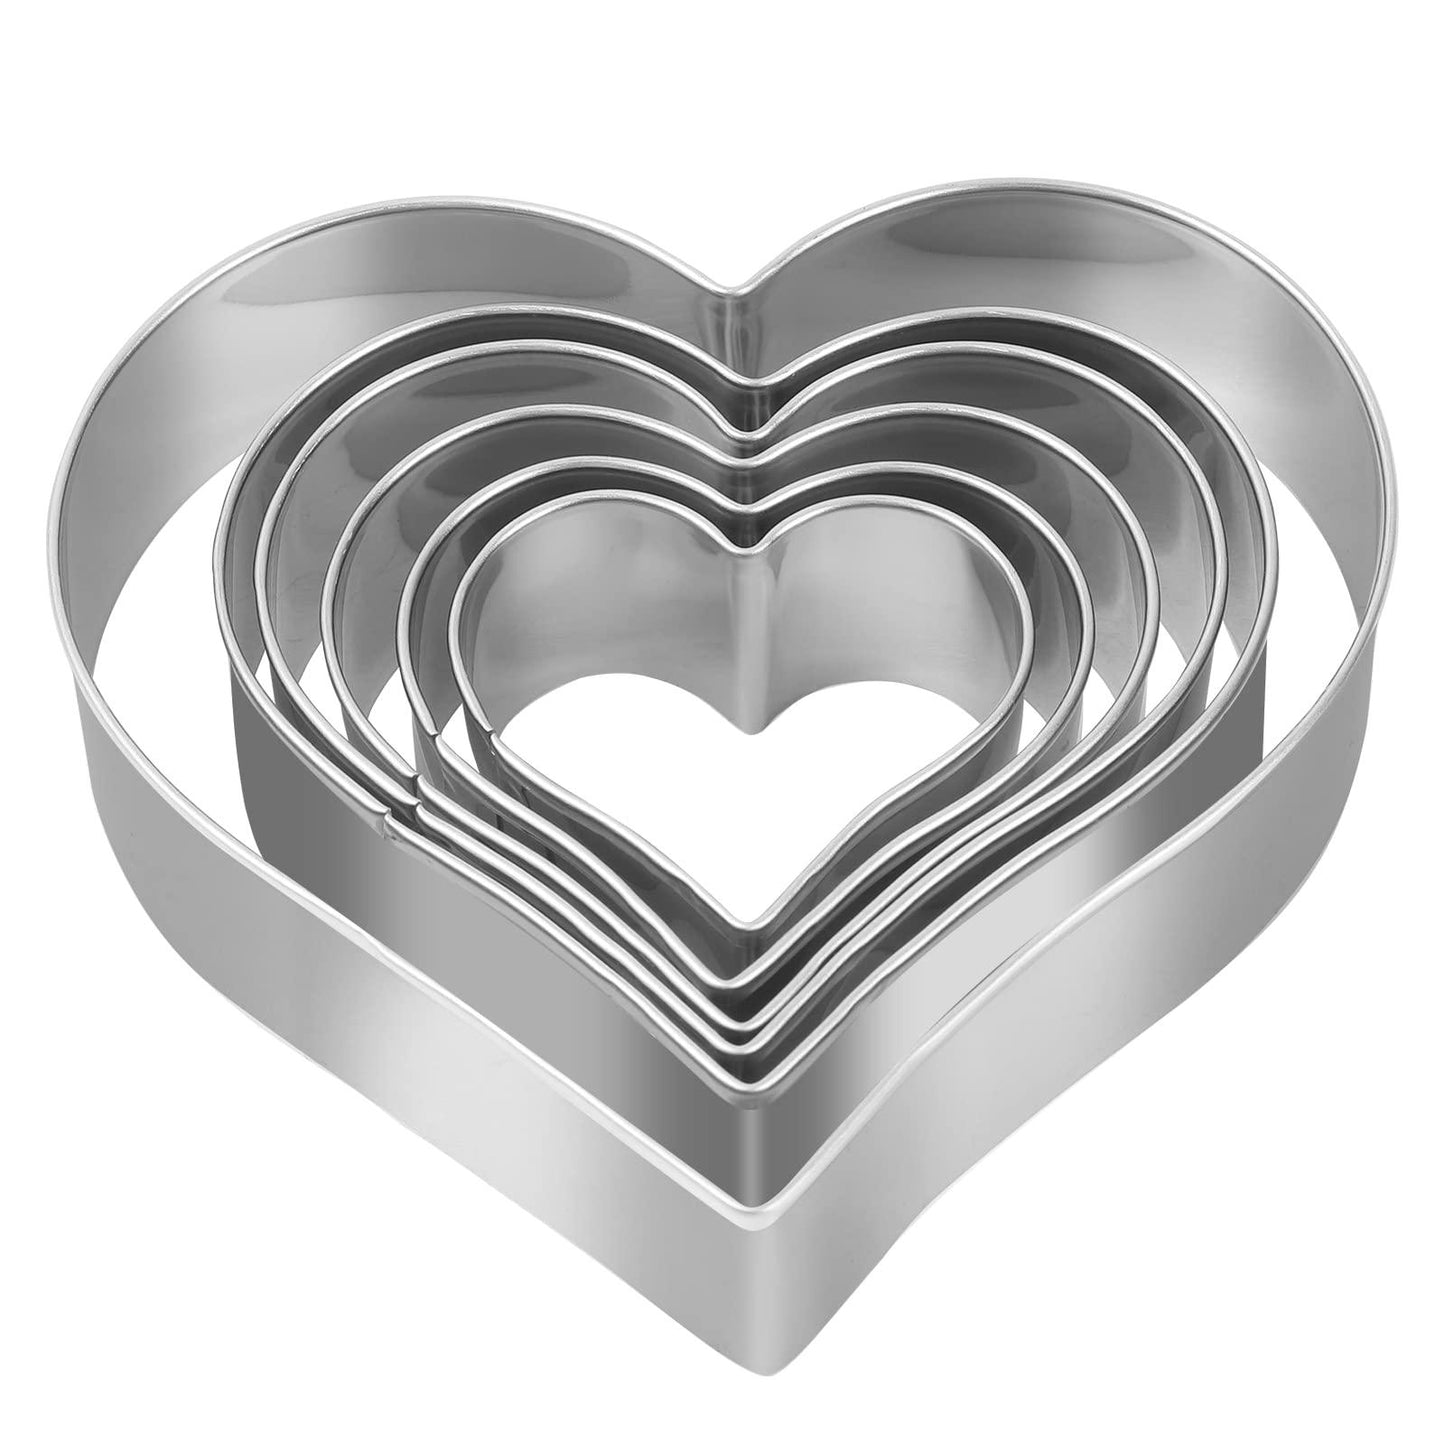 Heart Cookie Cutter Set - 6 Piece - 3 4/5", 3 1/5", 2 4/5", 2 3/5", 2 1/5", 1 4/5" - Heart Shaped Cookie Cutters, Stainless Steel Biscuit Pastry Cutters - CookCave